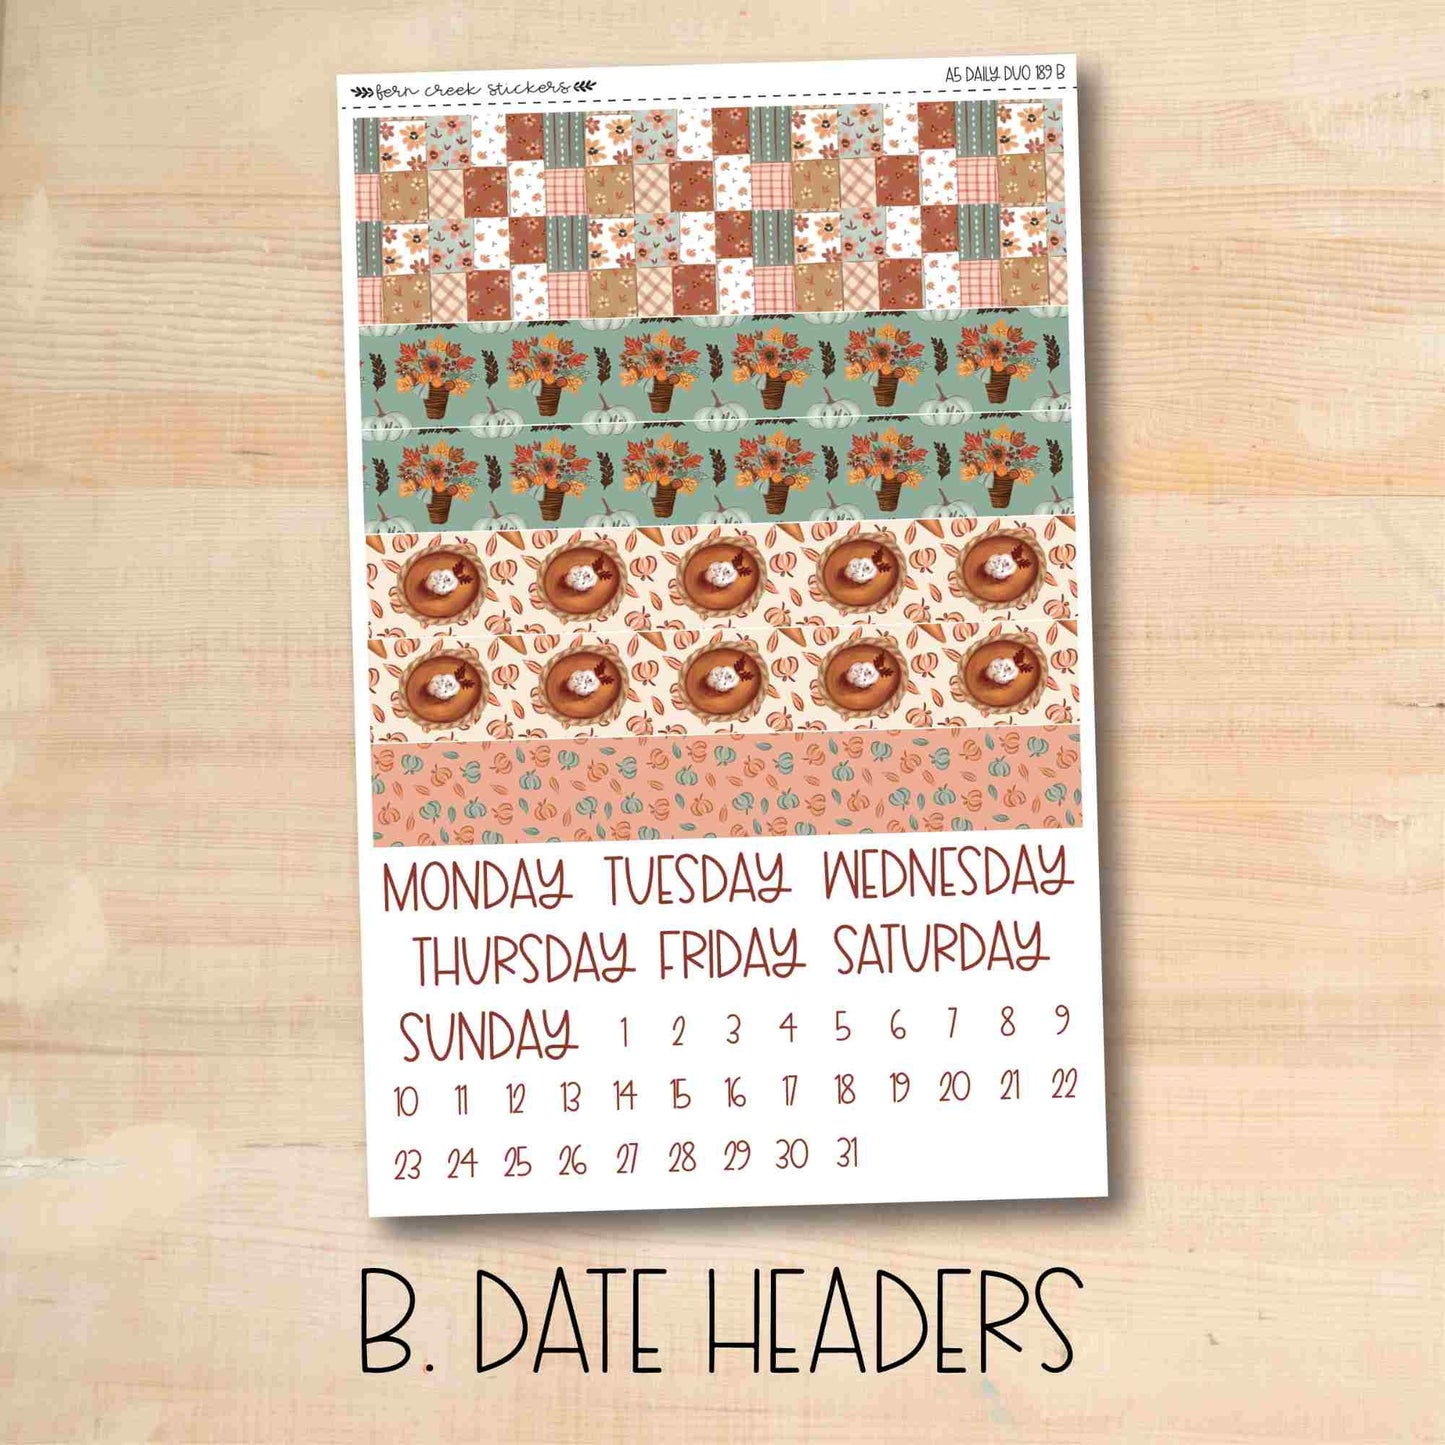 A5 Daily Duo 189 || GATHER A5 Erin Condren daily duo kit